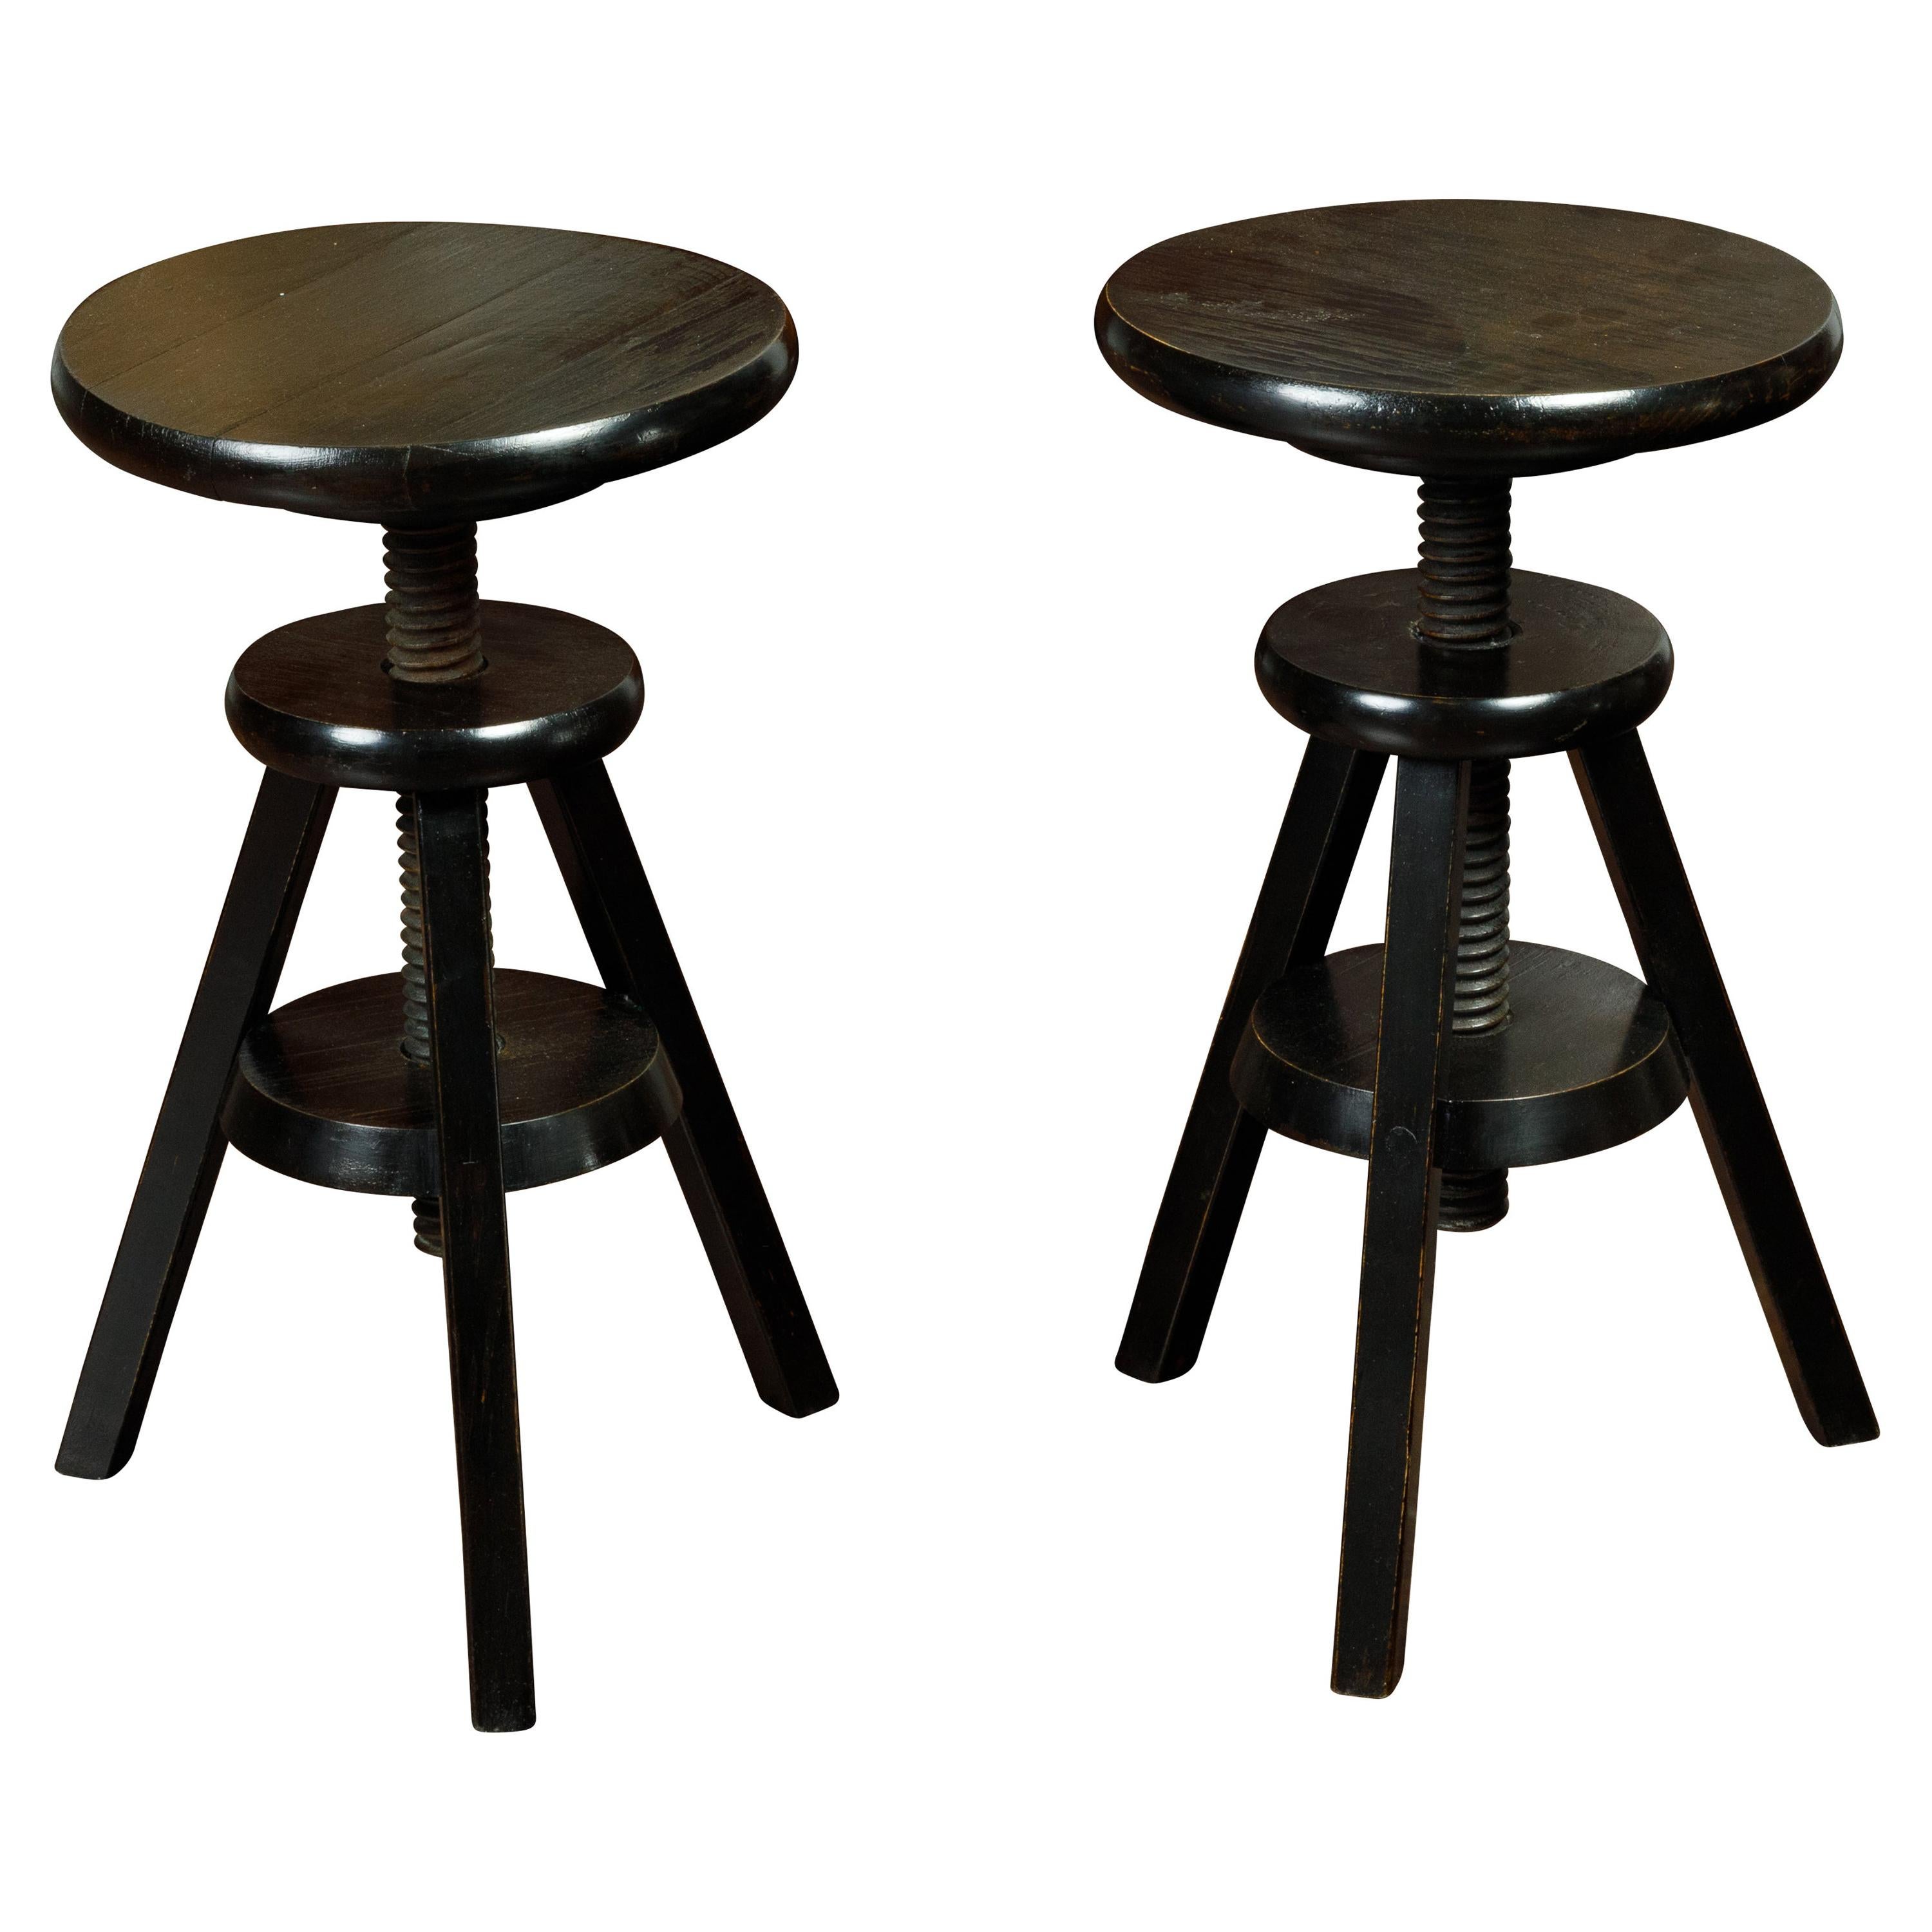 Pair of 1920s American Adjustable Artist's Stools with Black Finish For Sale